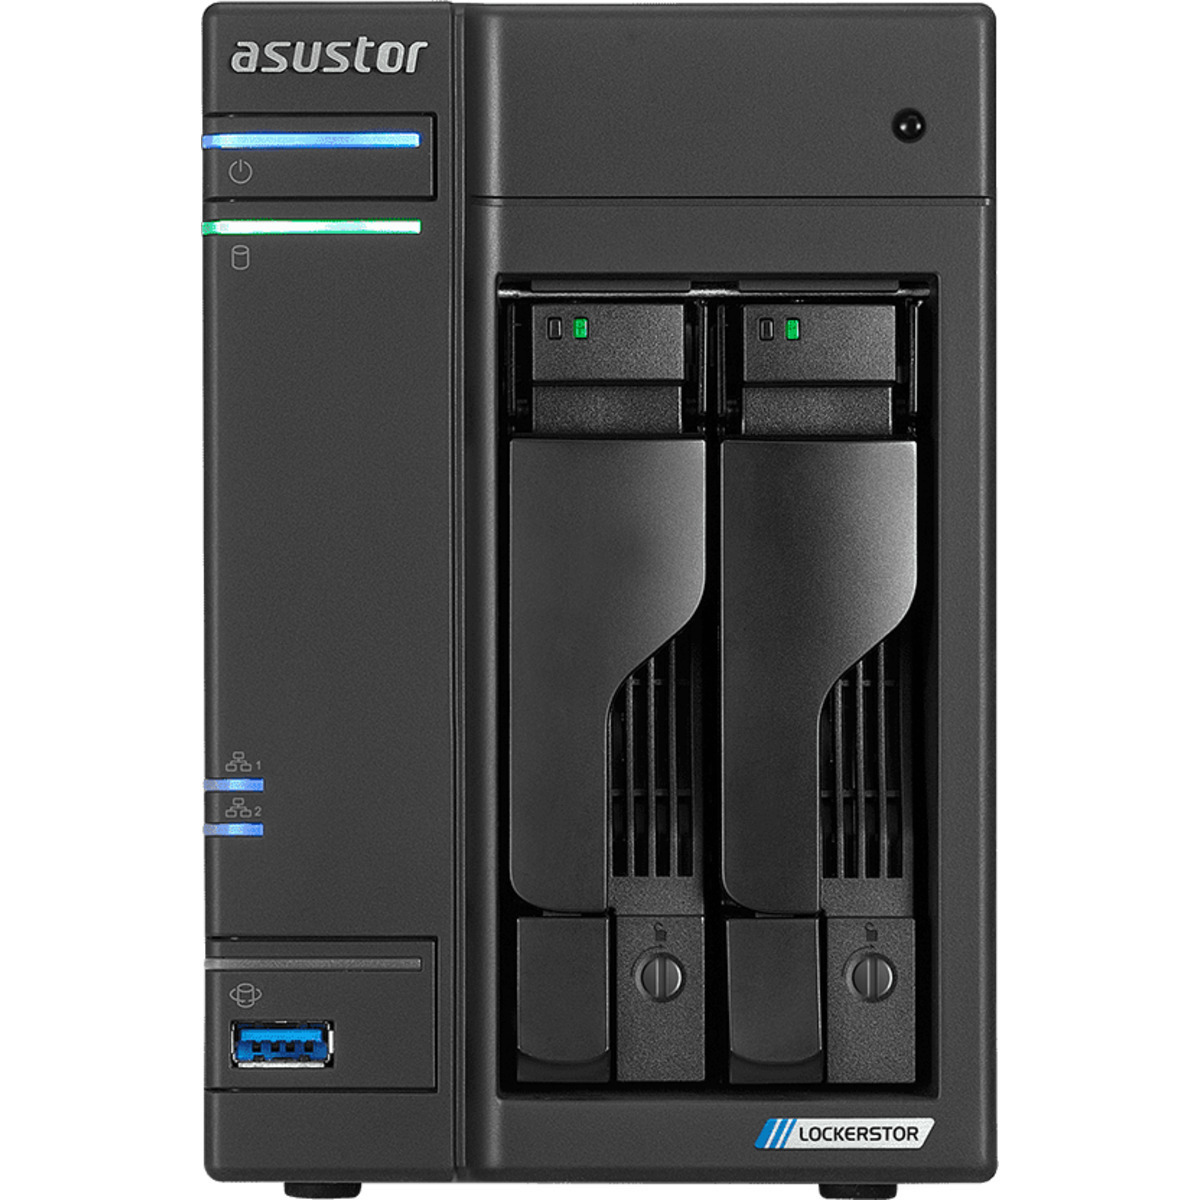 buy $1019 ASUSTOR AS6602T Lockerstor 2 16tb Desktop NAS - Network Attached Storage Device 2x8000gb Western Digital Ultrastar DC HC320 HUS728T8TALE6L4 3.5 7200rpm SATA 6Gb/s HDD ENTERPRISE Class Drives Installed - Burn-In Tested - FREE RAM UPGRADE - nas headquarters buy network attached storage server device das new raid-5 free shipping usa christmas new year holiday sale AS6602T Lockerstor 2